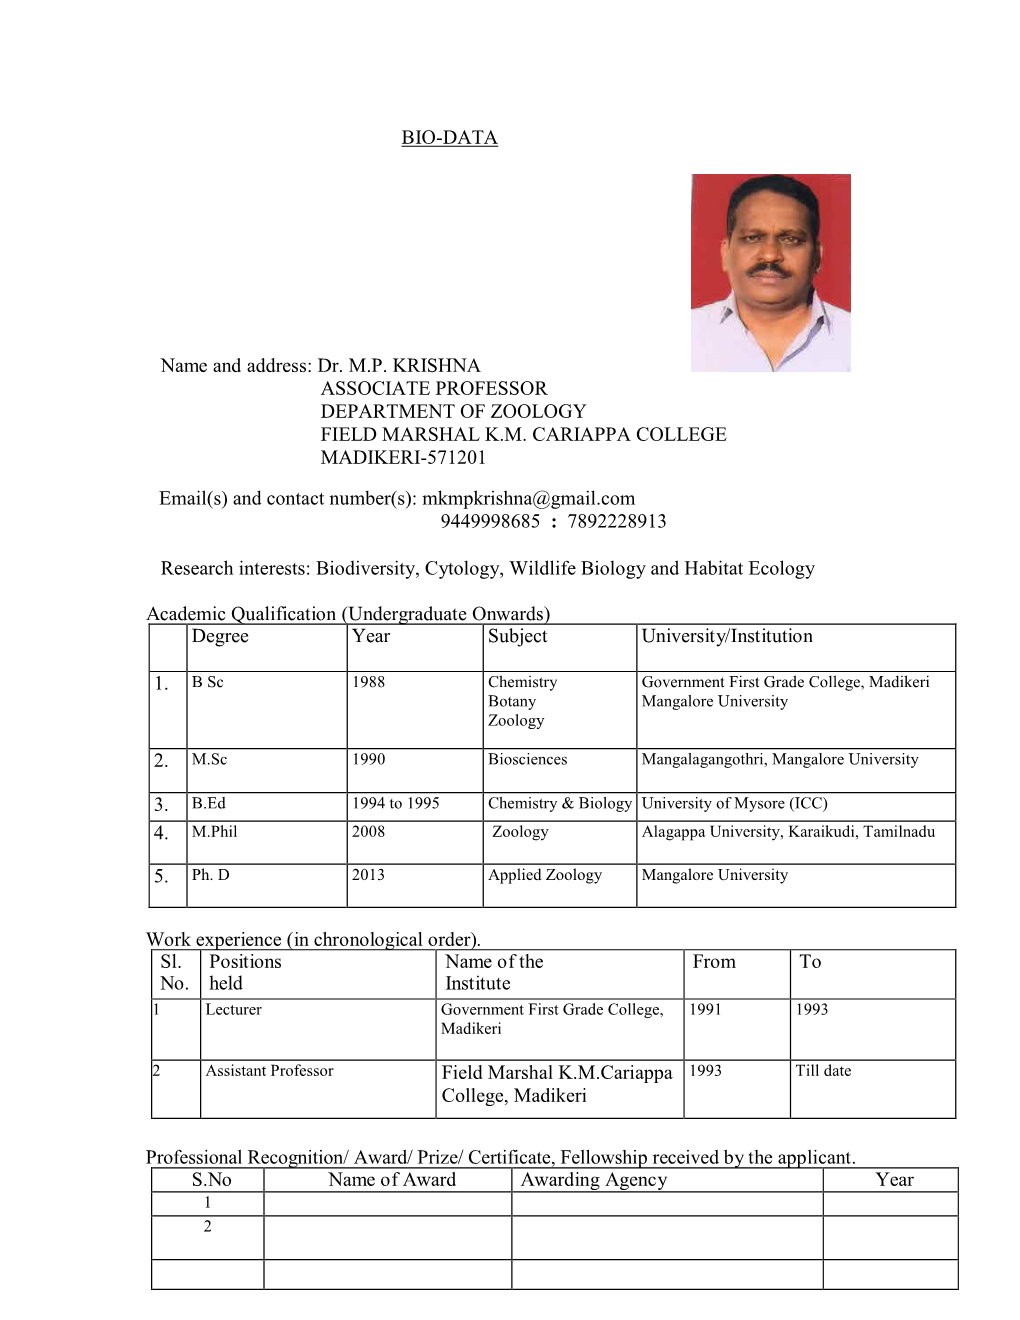 BIO-DATA Name and Address: Dr. M.P. KRISHNA ASSOCIATE PROFESSOR DEPARTMENT of ZOOLOGY FIELD MARSHAL K.M. CARIAPPA COLLEGE MA